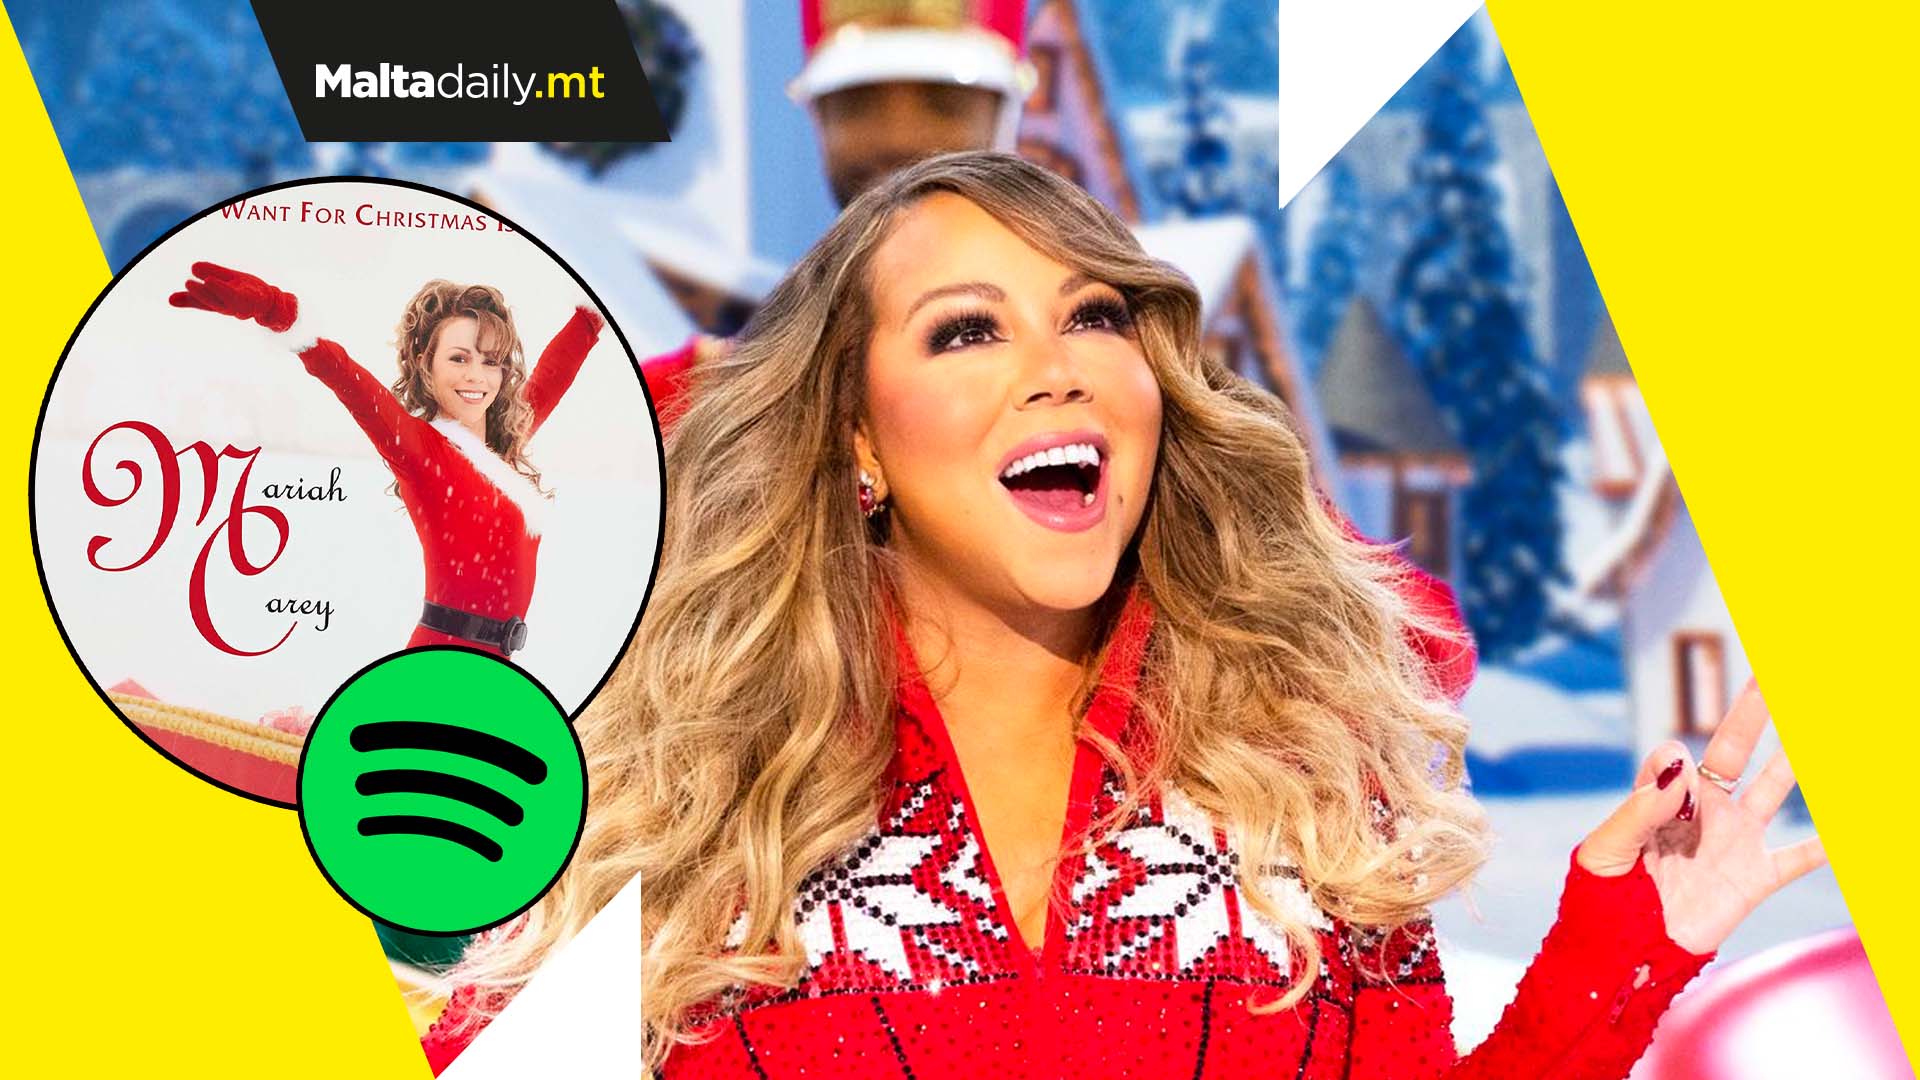 Mariah Carey breaks Spotify record for most single-day streams